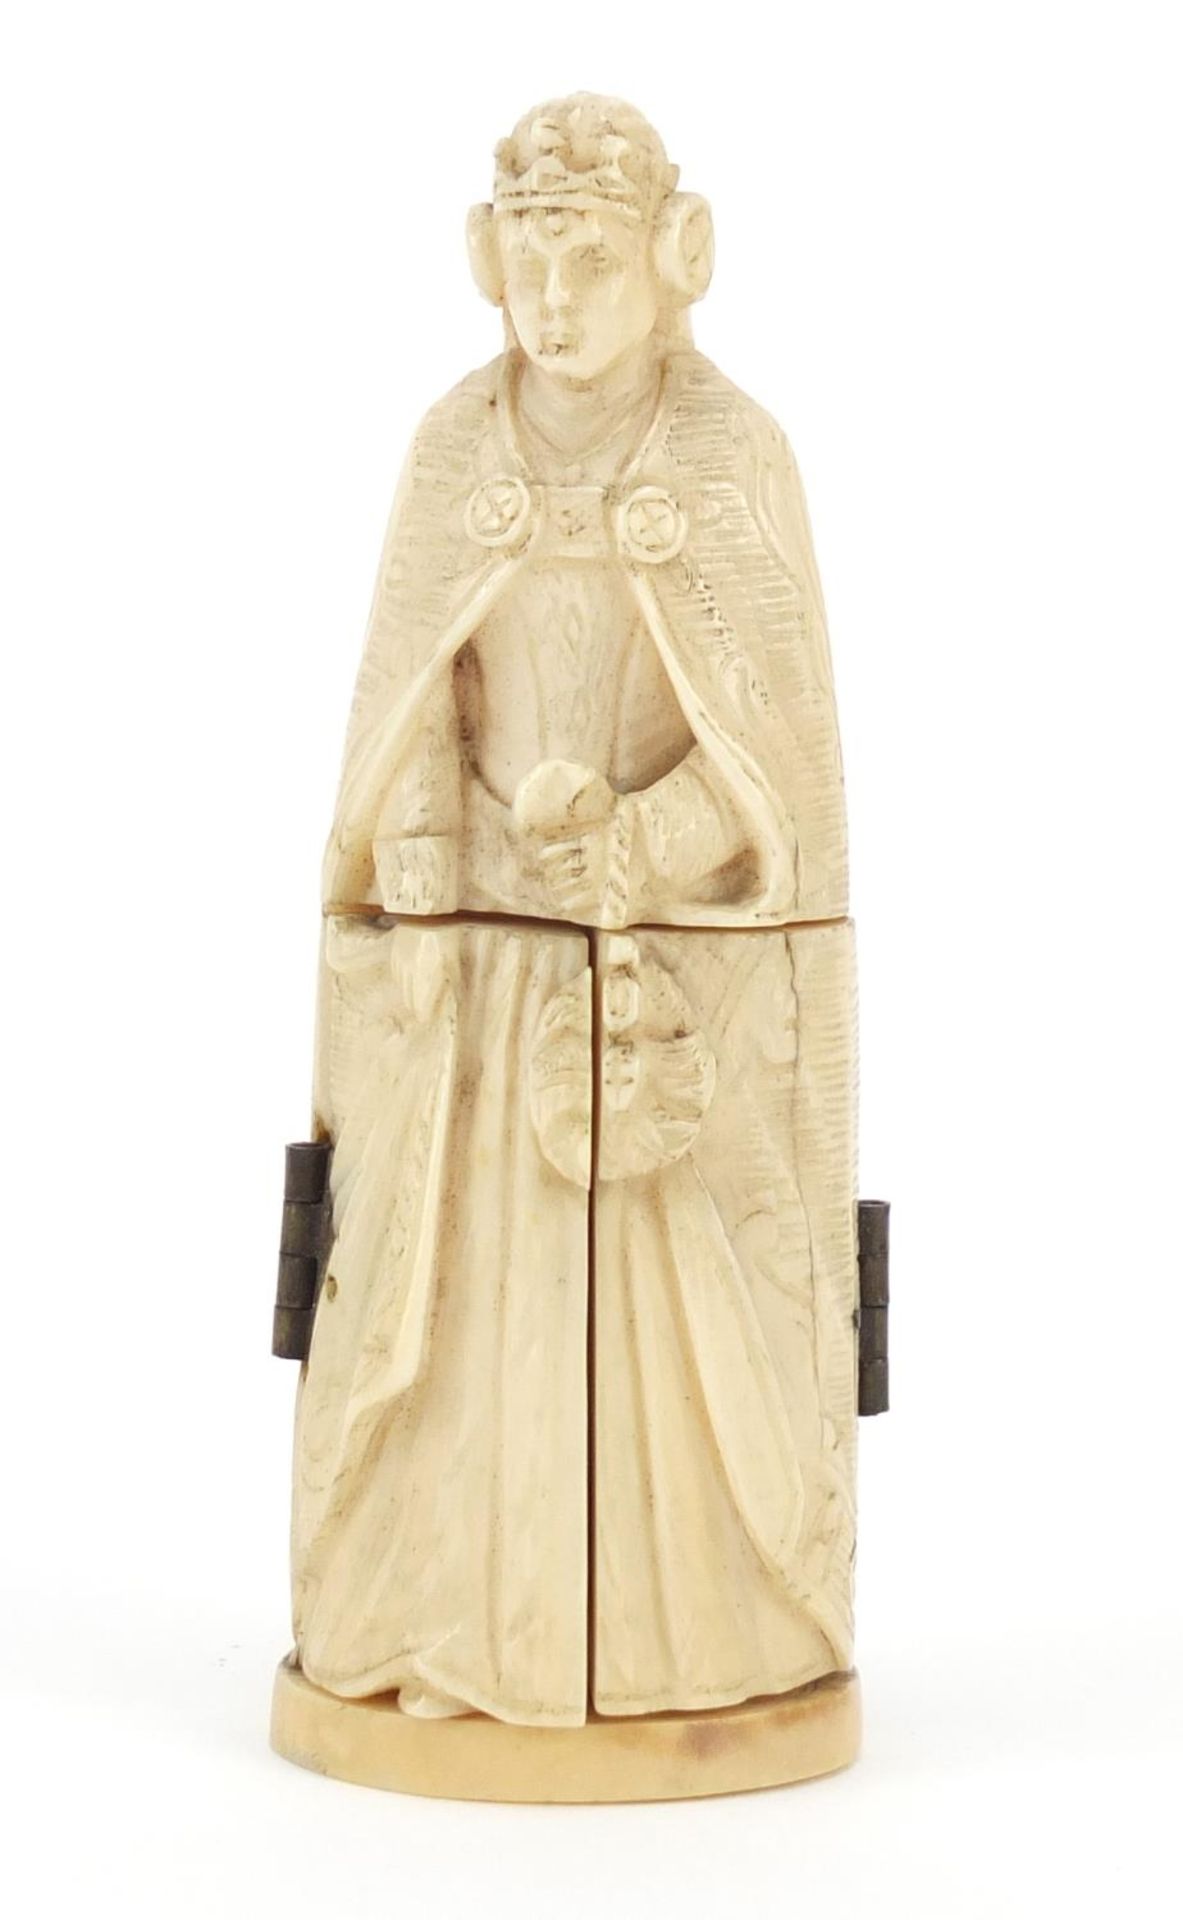 19th century French Dieppe carved ivory tryptych figure, 8.5cm high - Image 3 of 9